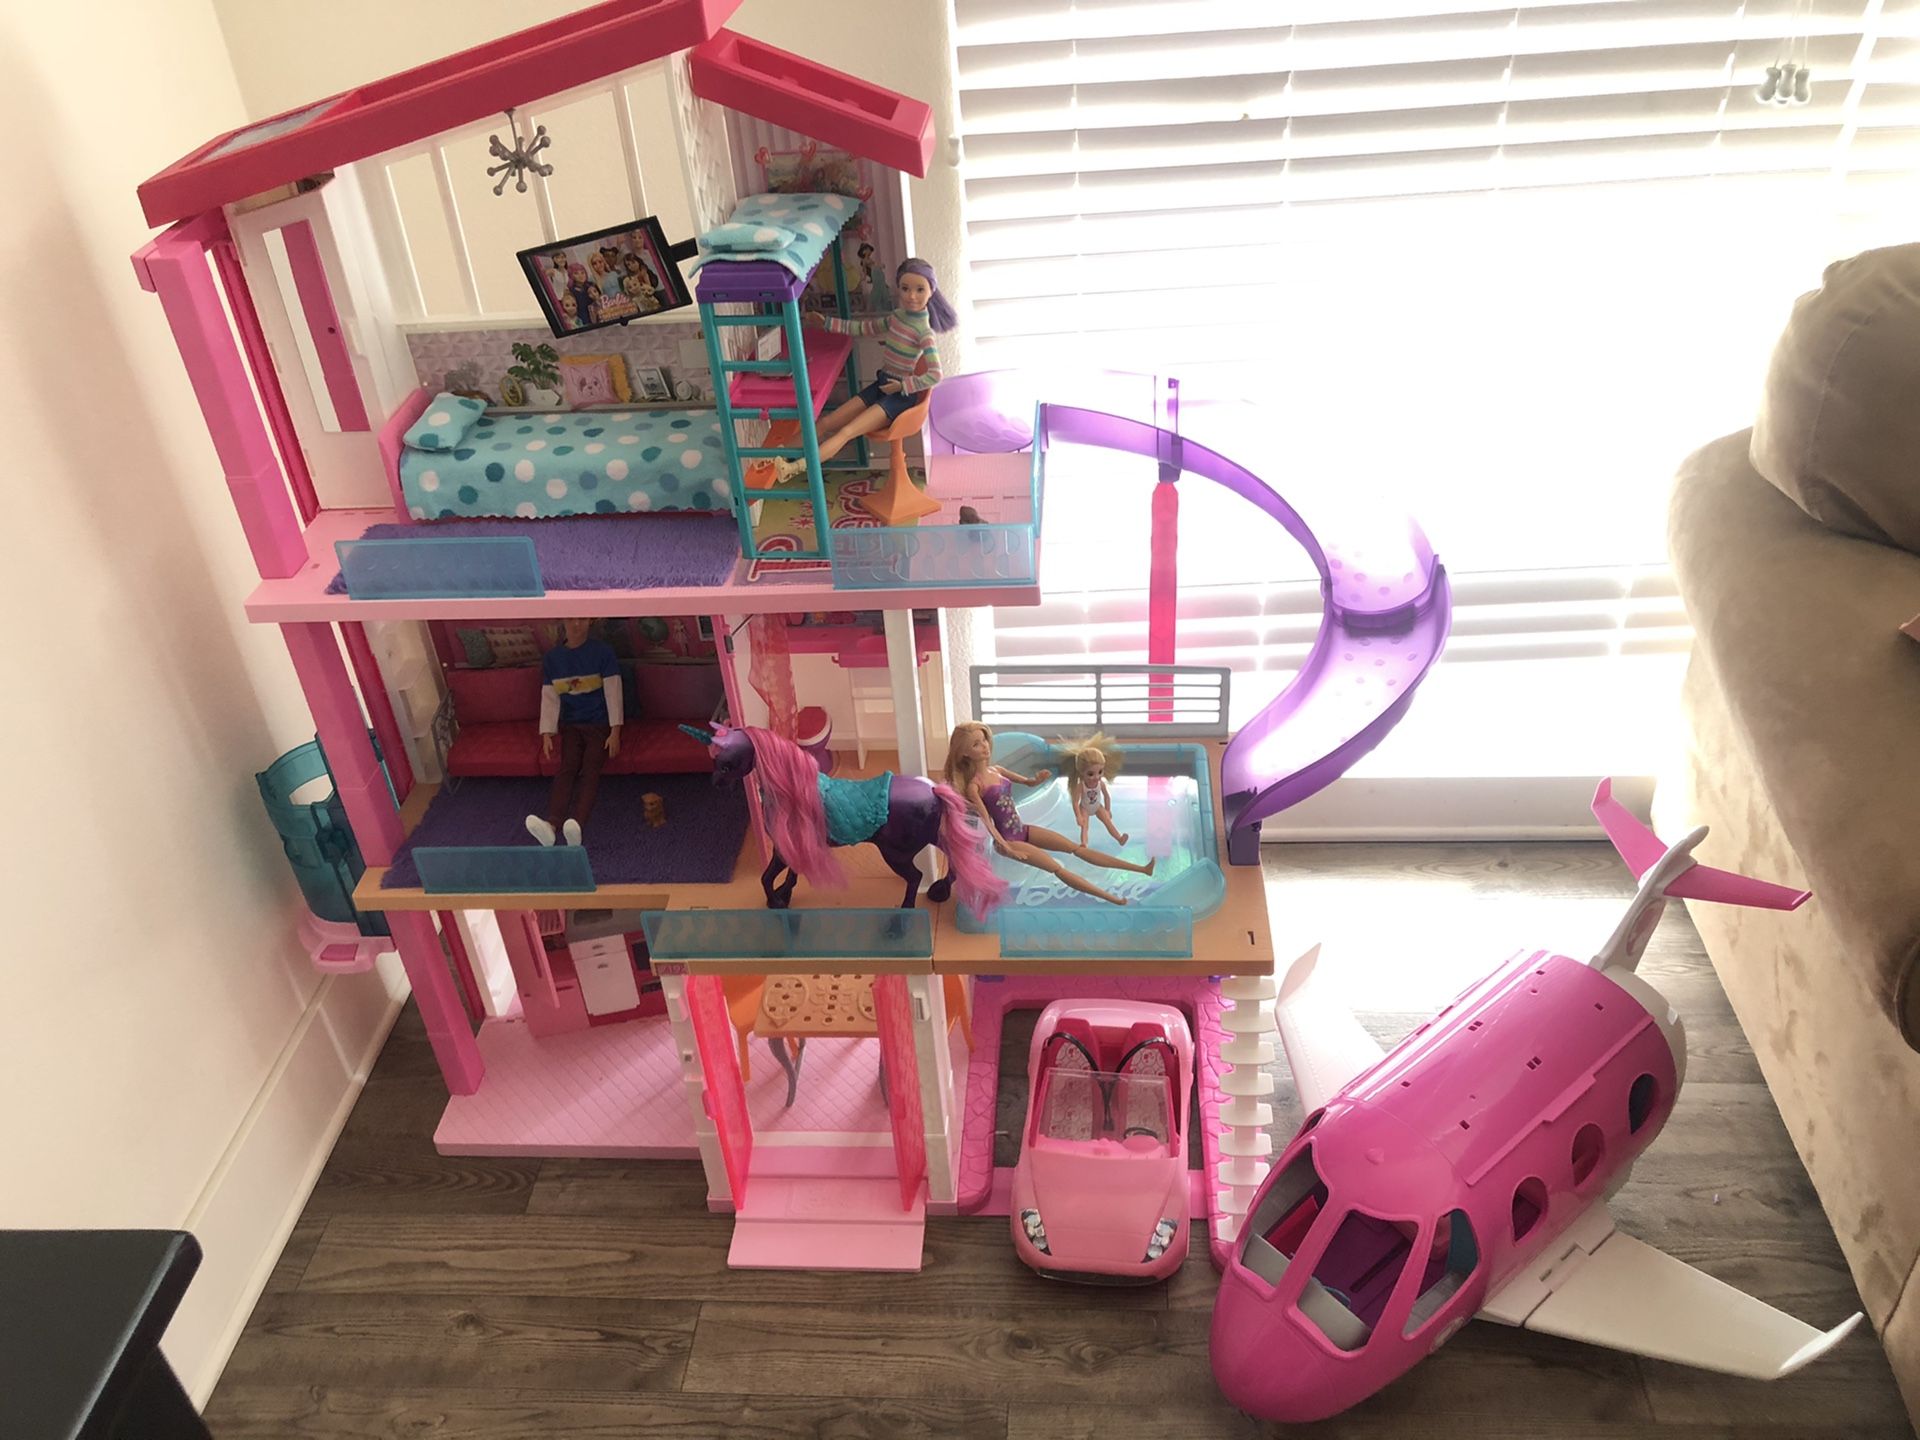 Barbie House with furniture, Barbie dolls, Barbie furniture, Barbie car, Barbie horse, and Barbie airplane